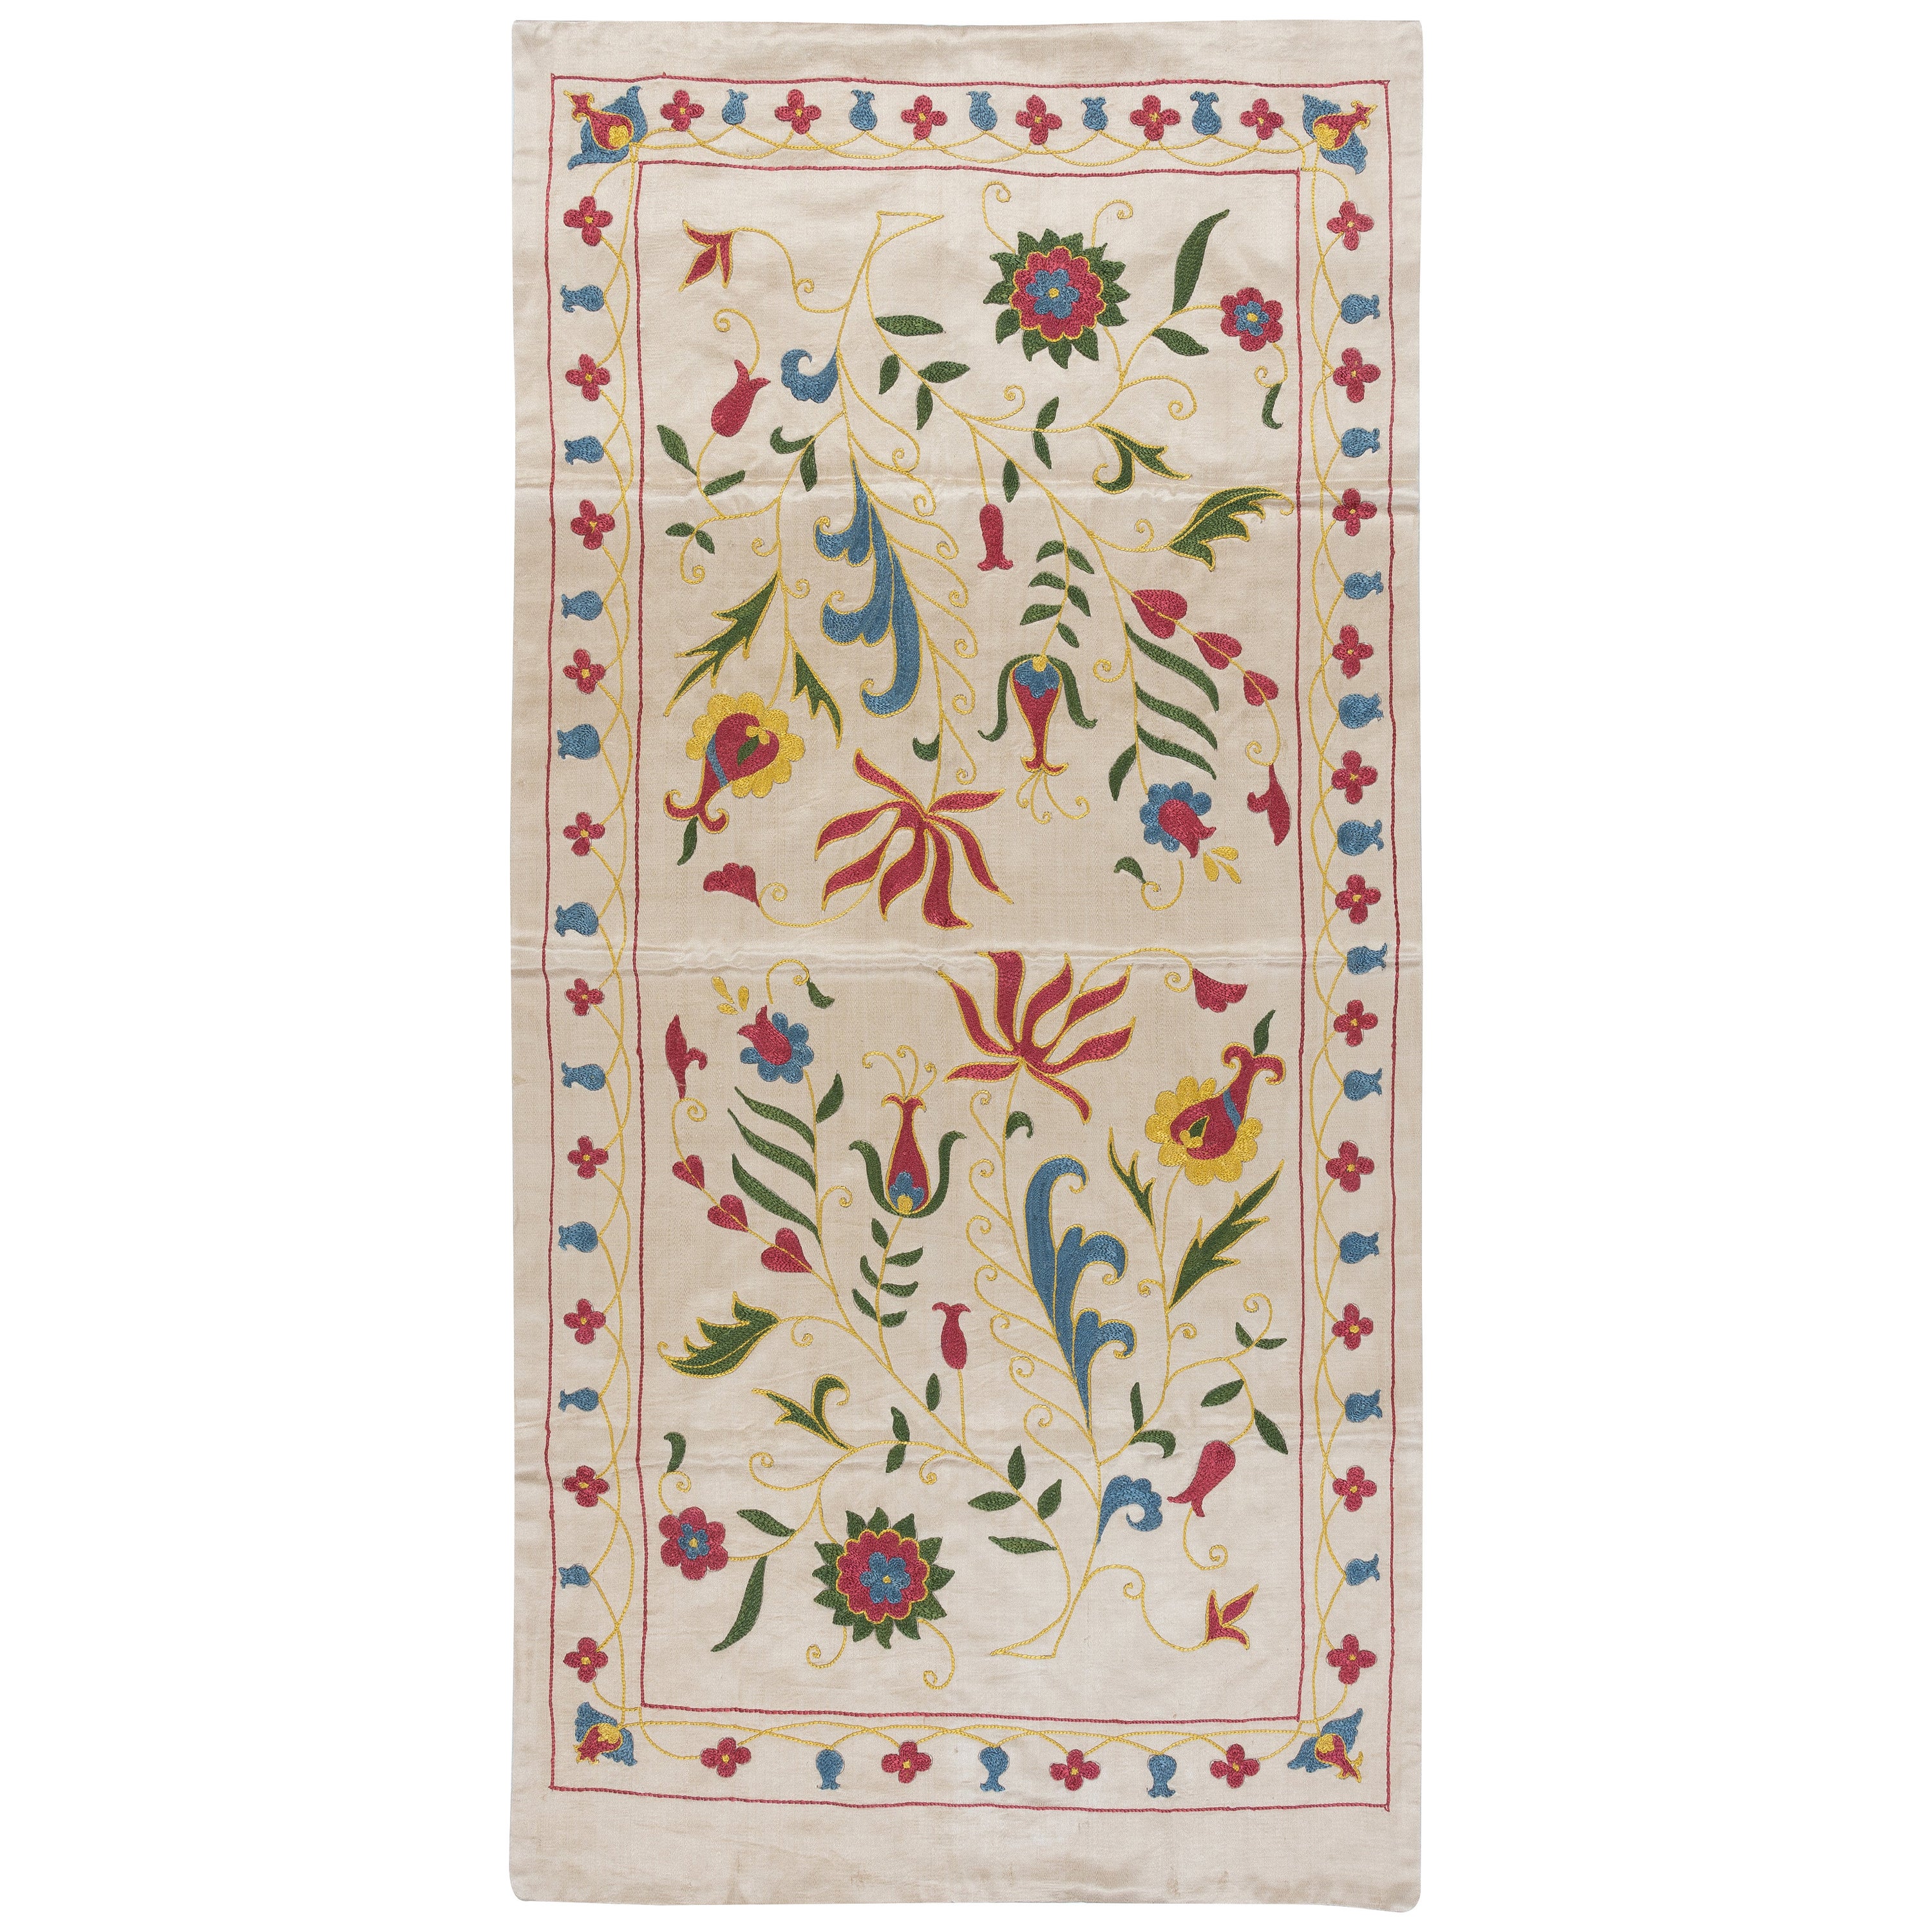 20"x40" 100% Silk Wall Hanging, Wall Decor, Embroidered Cloth, Suzani Tapestry For Sale